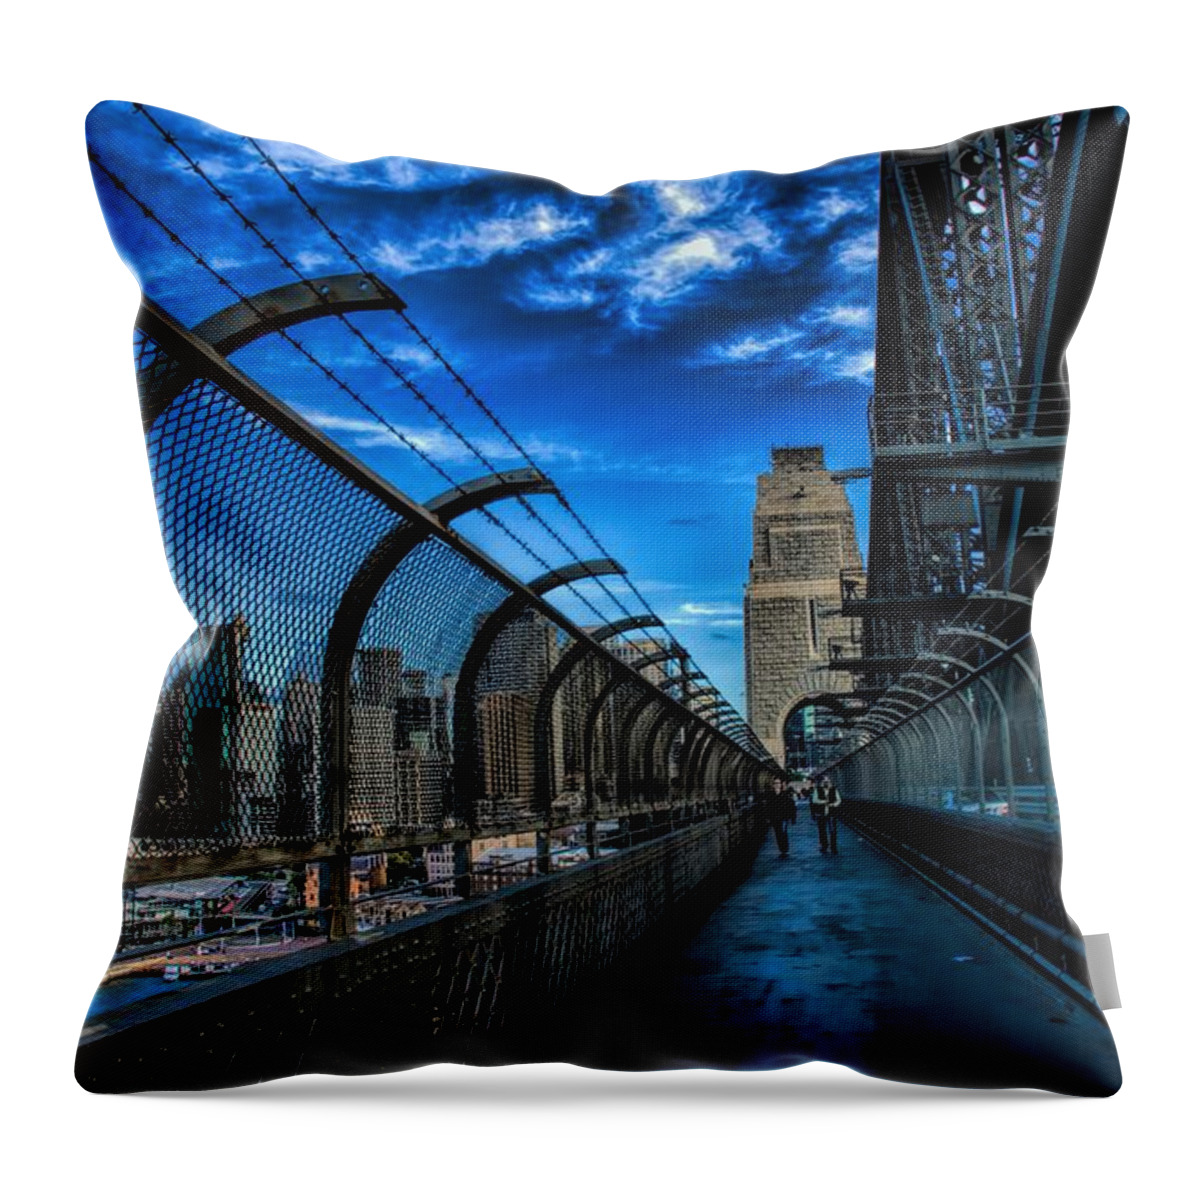 Cityscape Throw Pillow featuring the photograph Sydney Harbour Bridge Walkway by Diana Mary Sharpton